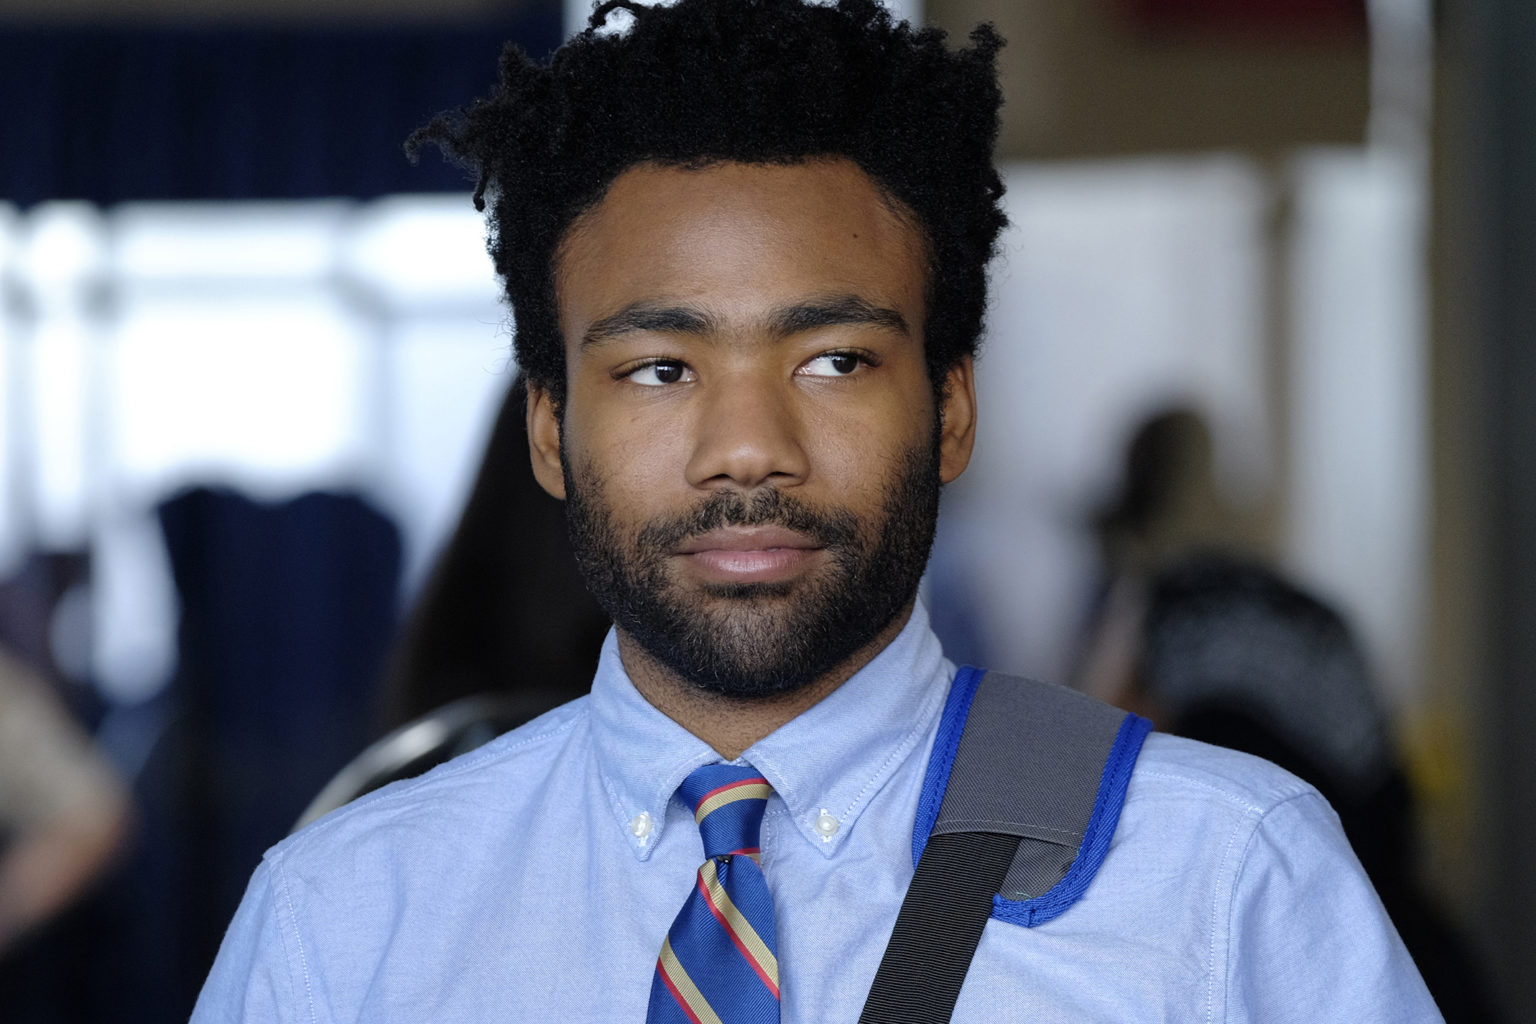 Donald Glover Biography [2022] Age, Height, Net Worth, Wife, Parents